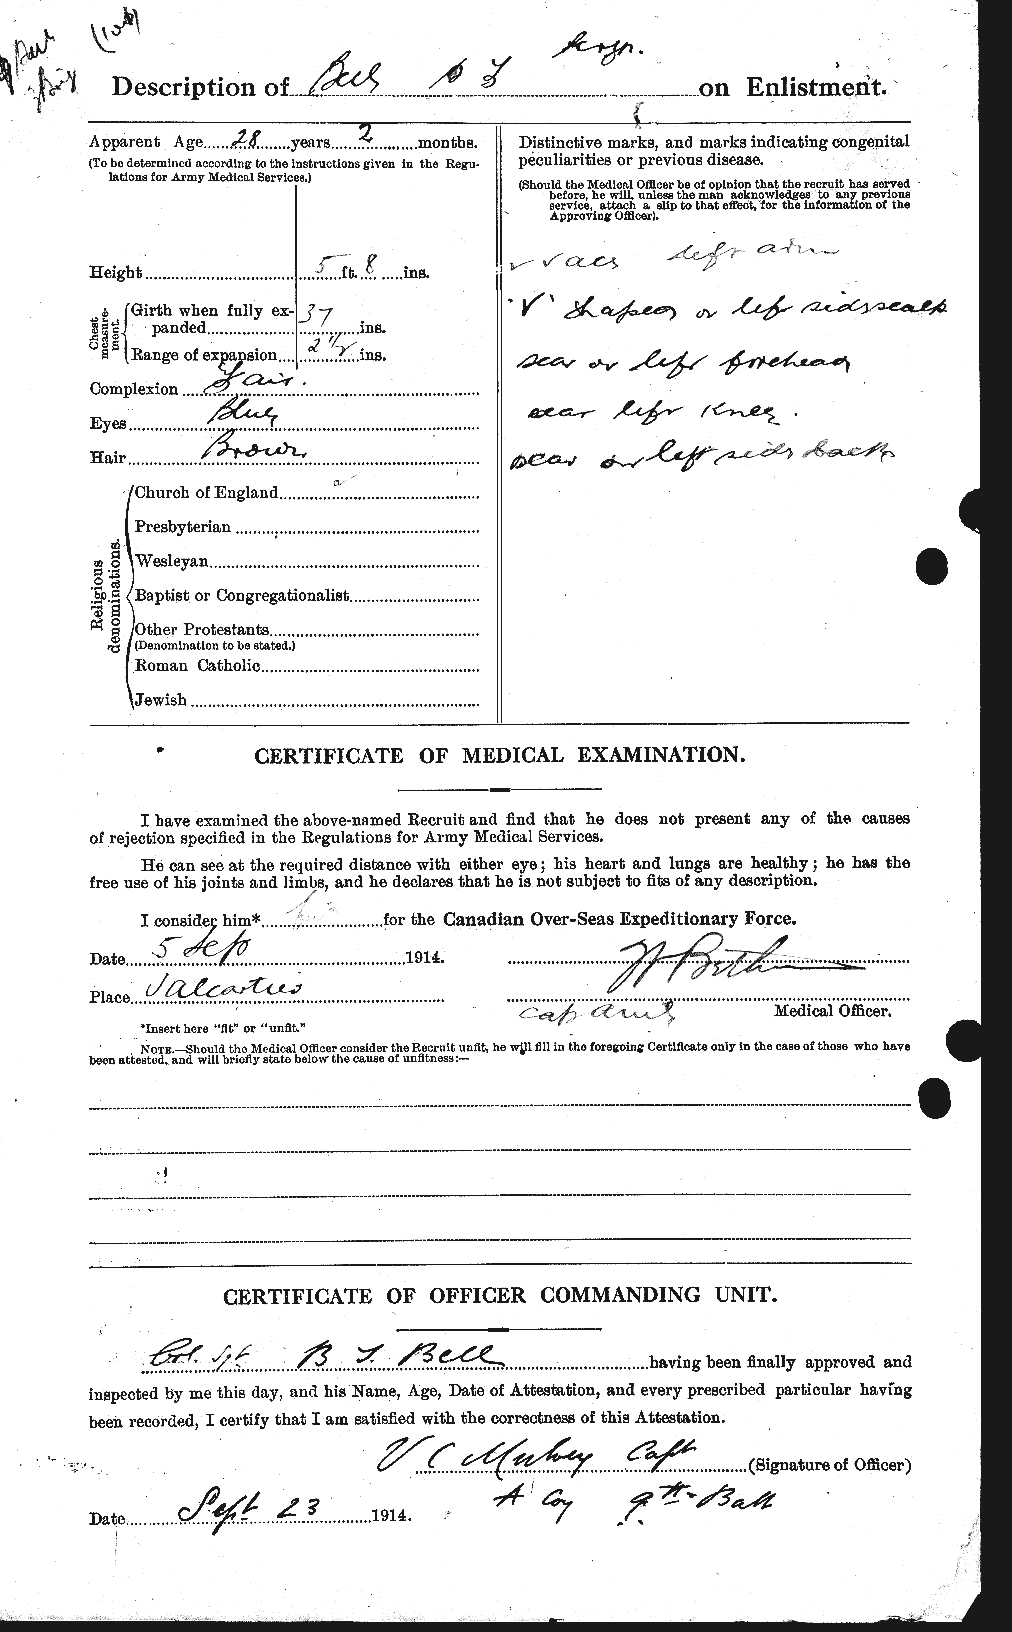 Personnel Records of the First World War - CEF 233904b